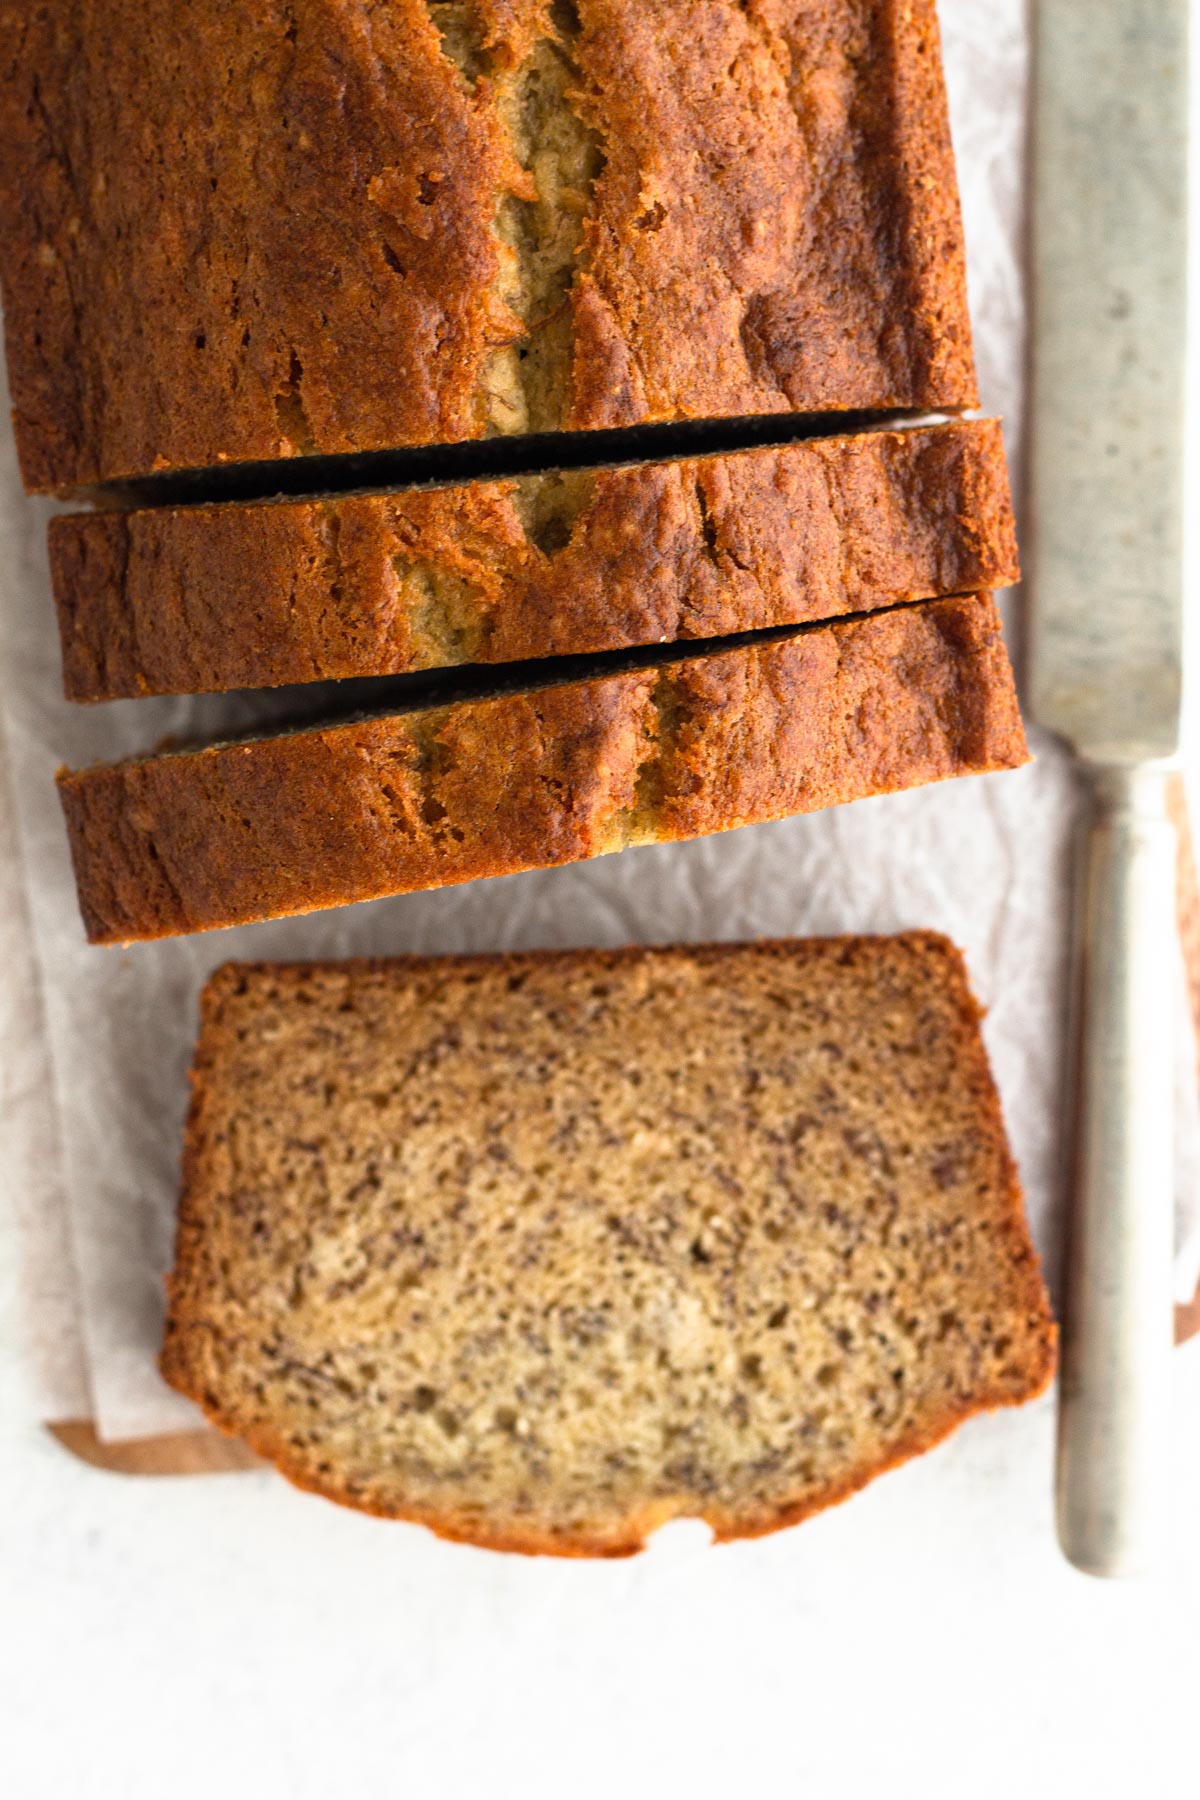 Overhead view of sliced banana bread atop parchment paper with a butter knife.